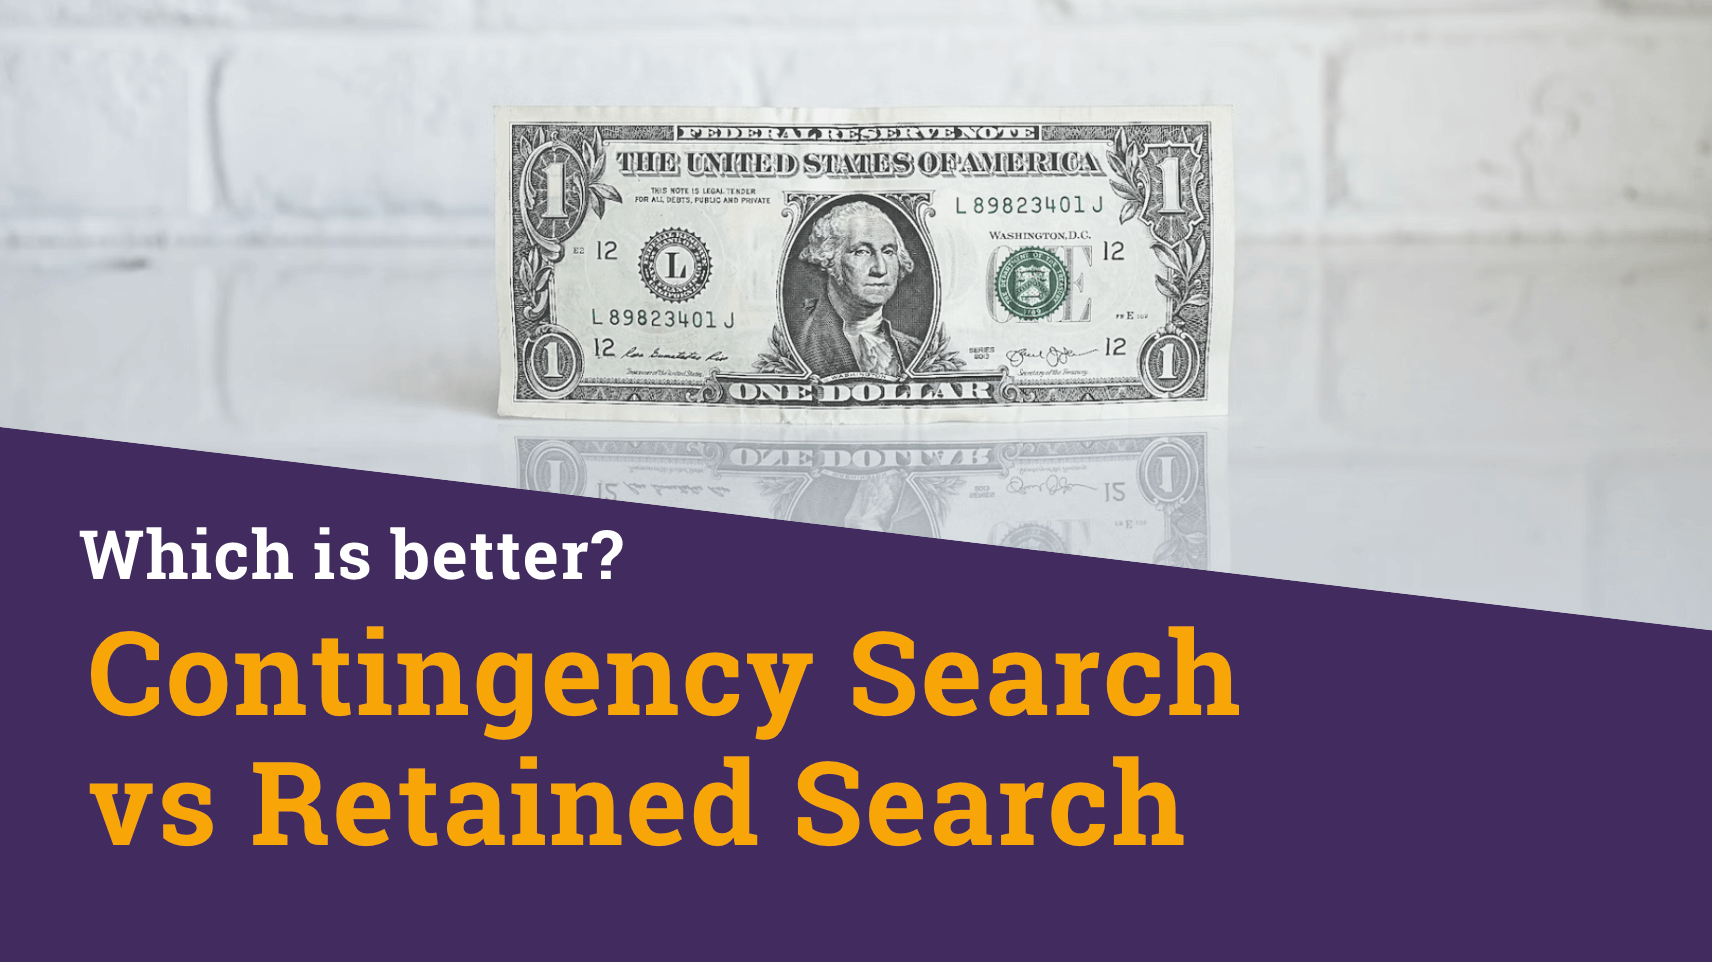 Contingency Search vs Retained Search. Which is better?